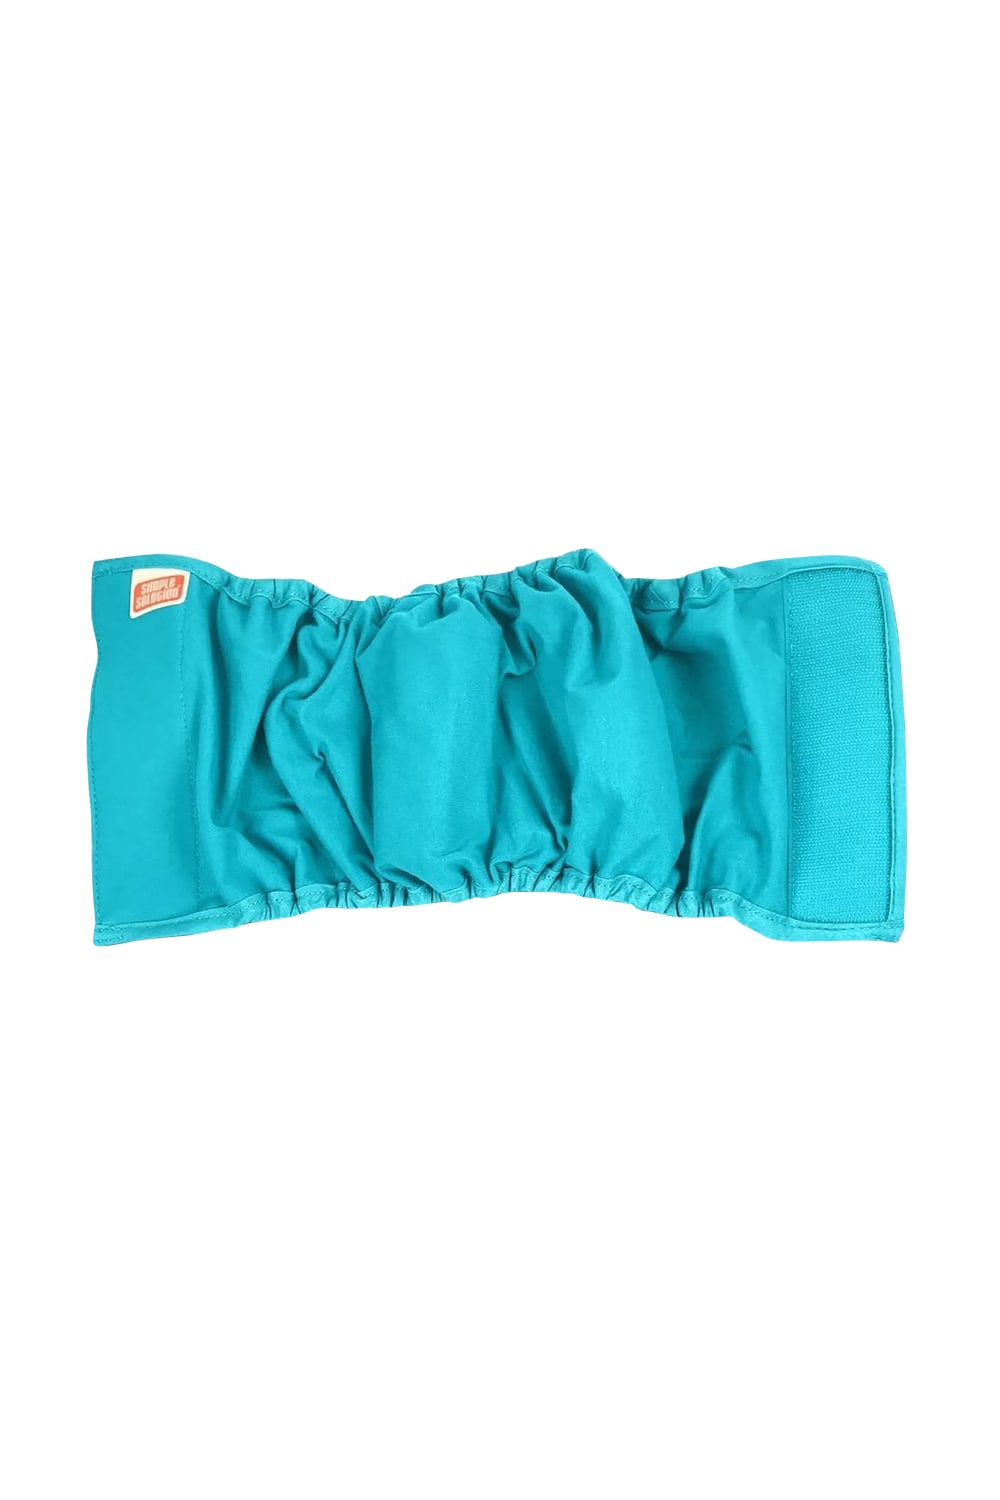 Simple Solution Washable Dog Diaper (Teal) (S)